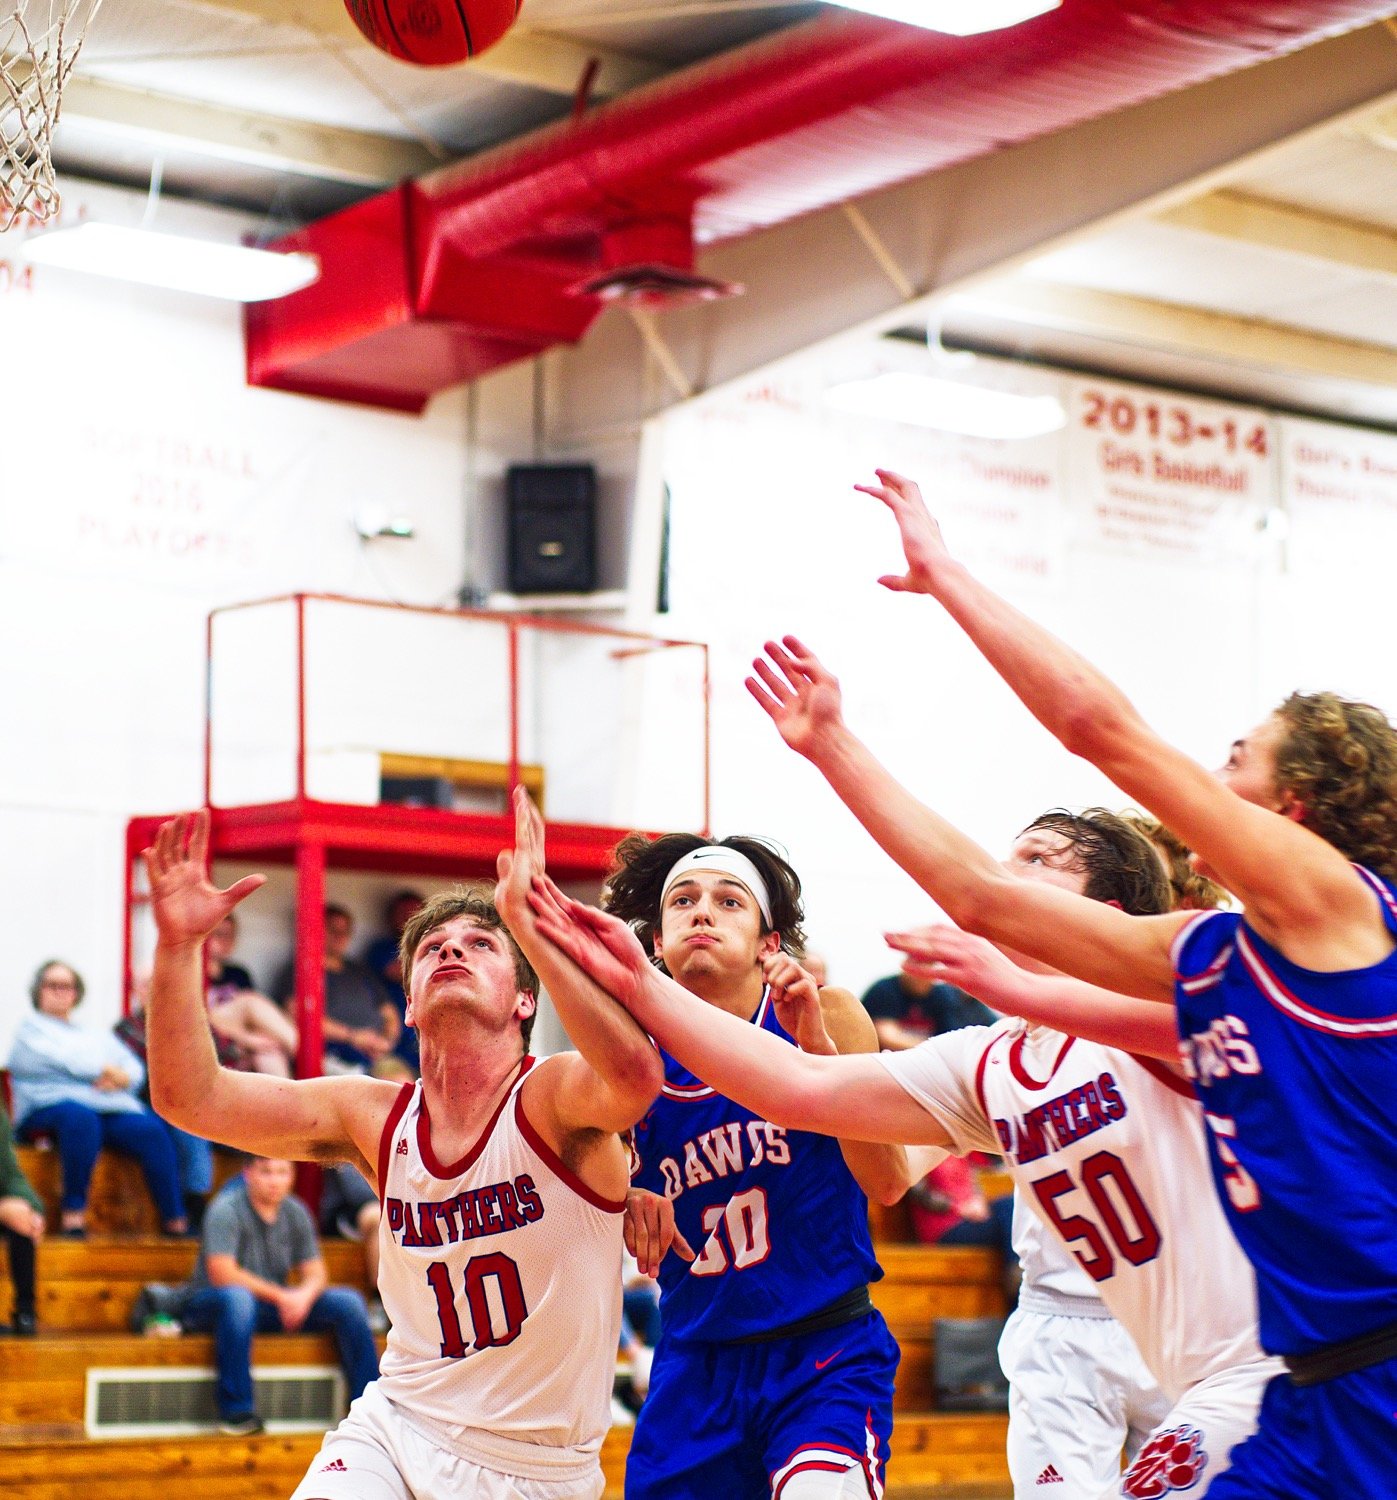 From left, Blake Weissert, Thomas Sebedra, Gavin Dailey and Brady Floyd fight for position to nab a rebound. [catch more of the cross-county hardcourt contest captured]